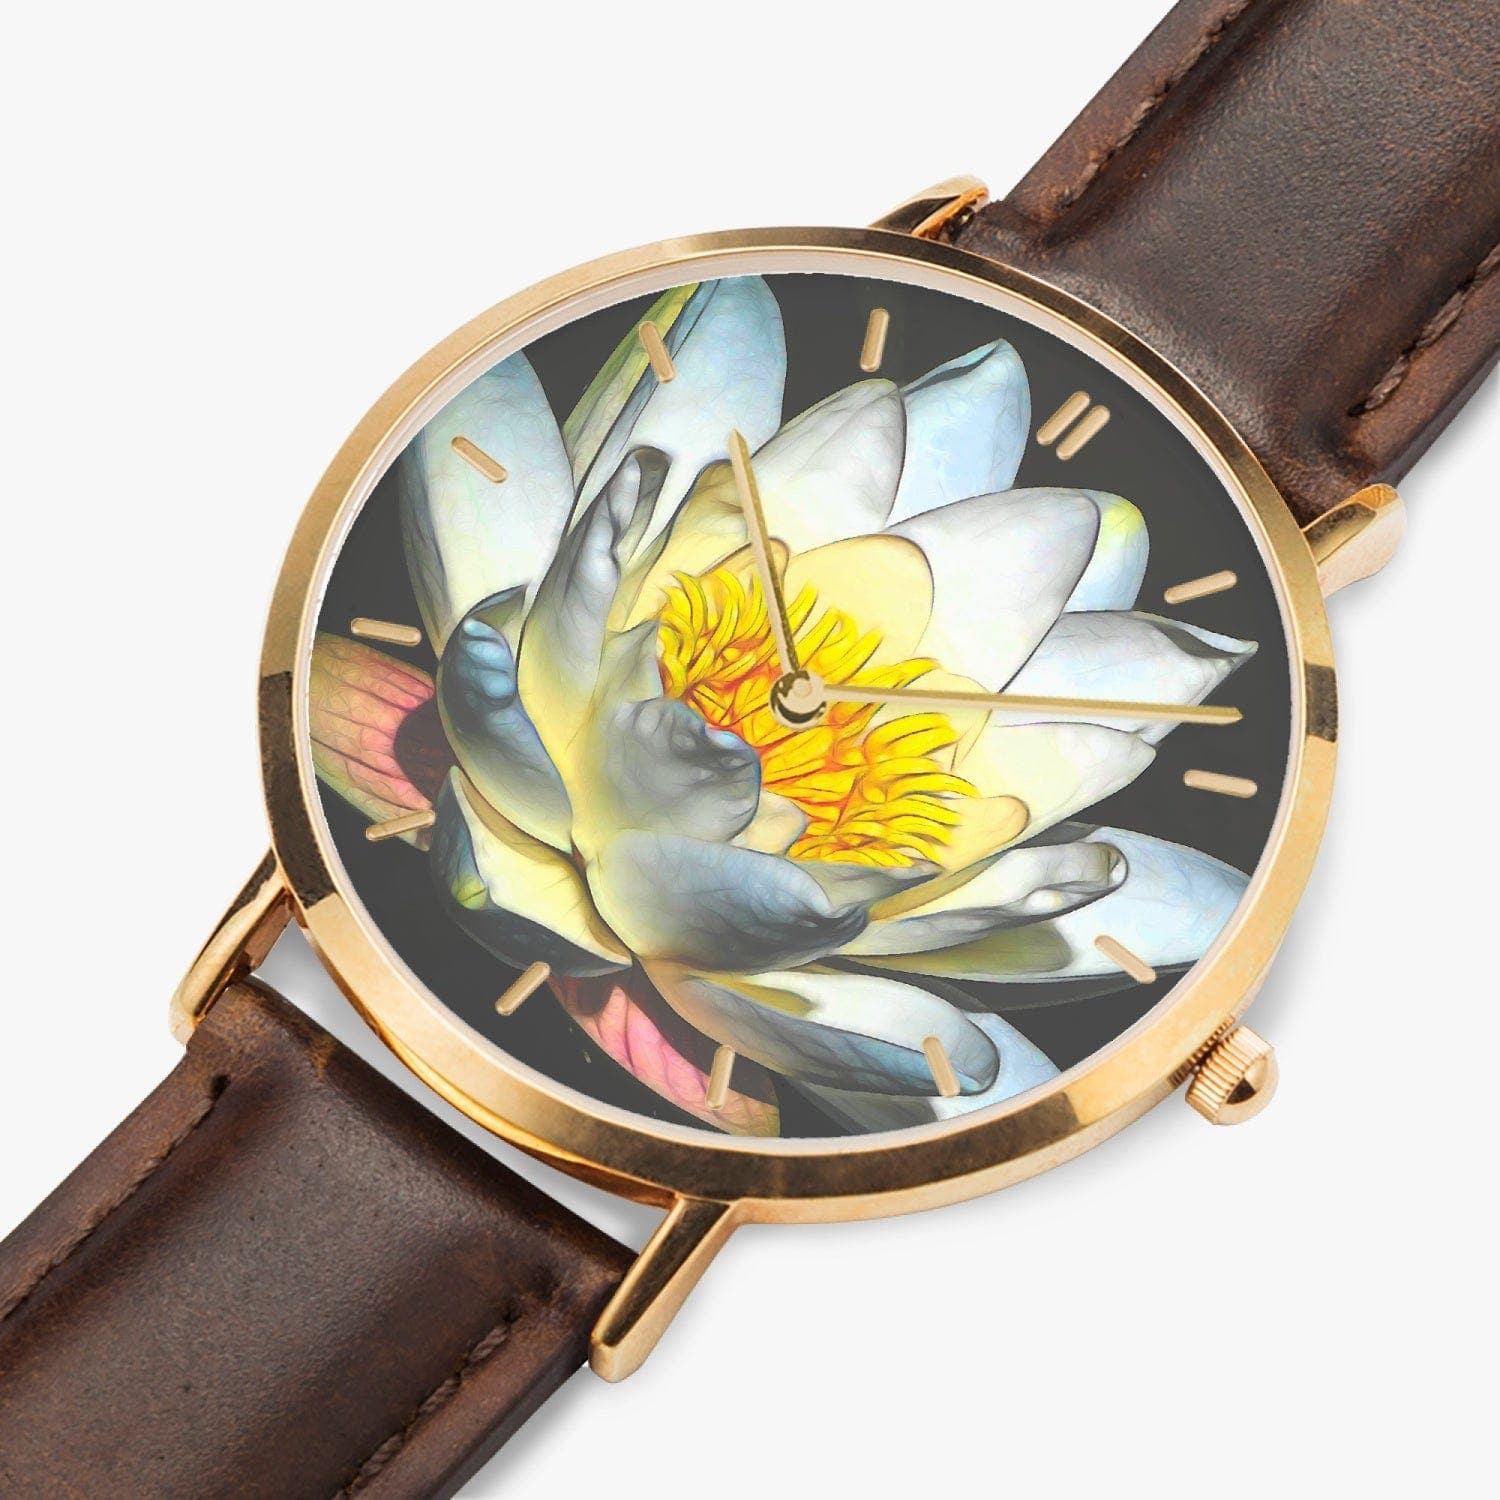 Water lilly, designed Hot Selling Ultra-Thin Leather Strap Quartz Watch (Rose Gold With Indicators) by Sensus Studio Design